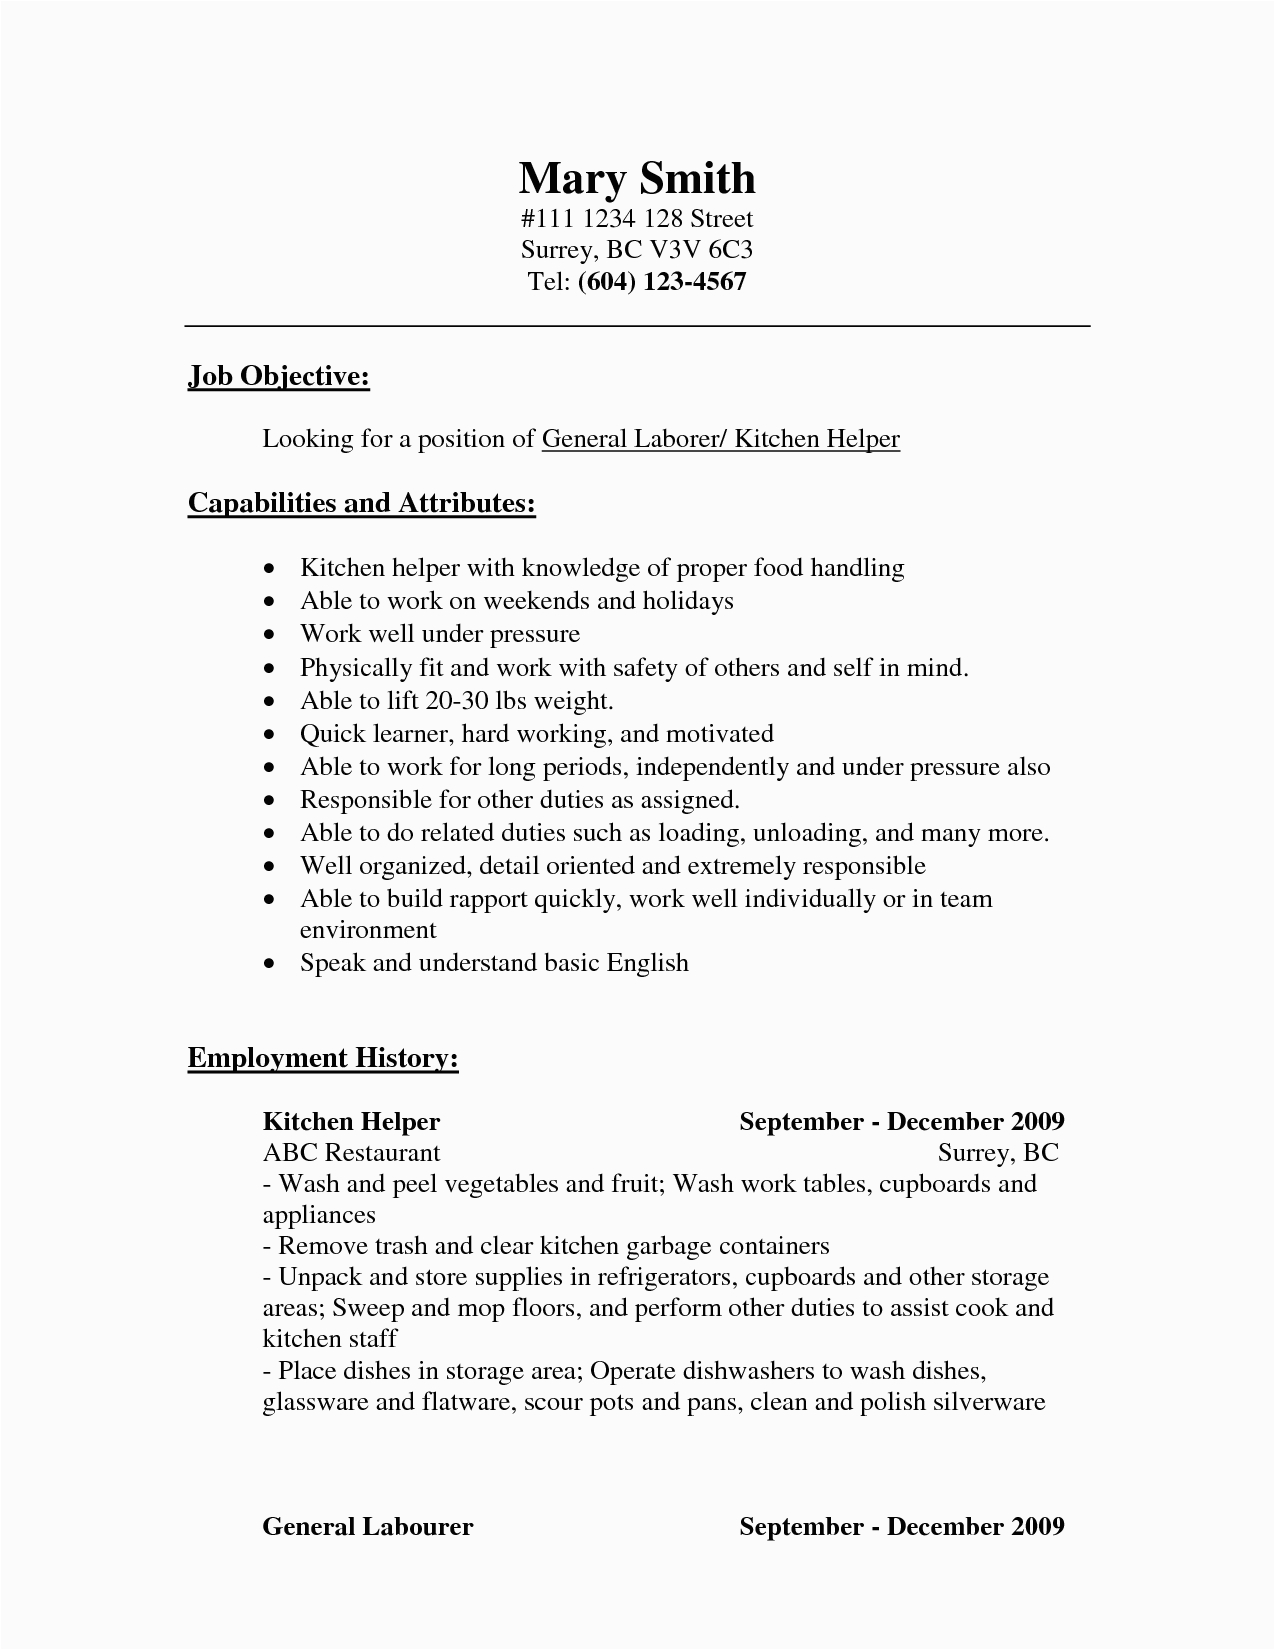 Sample for A Resume for Kitchen Help Kitchen Help Resume Madeira Restaurant Kitchen Helper Resume Example